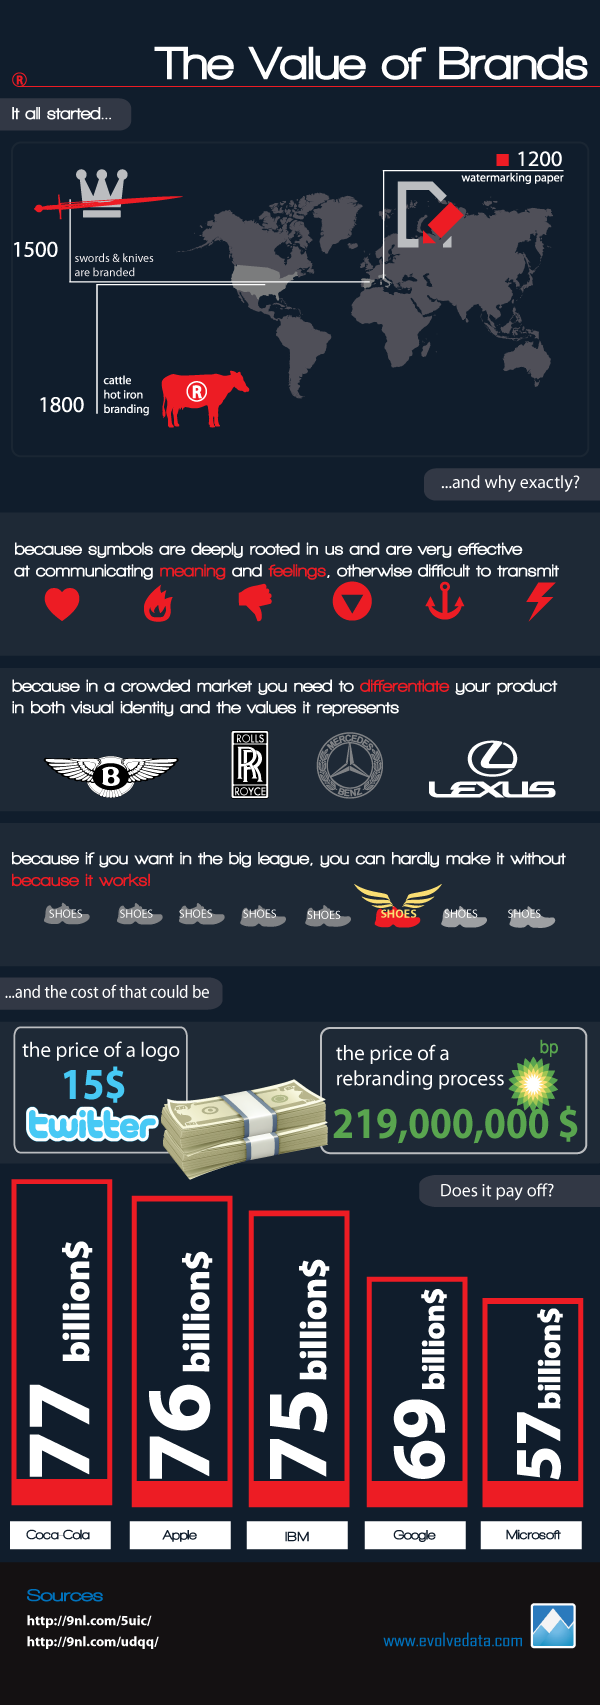 the value of brands infographic